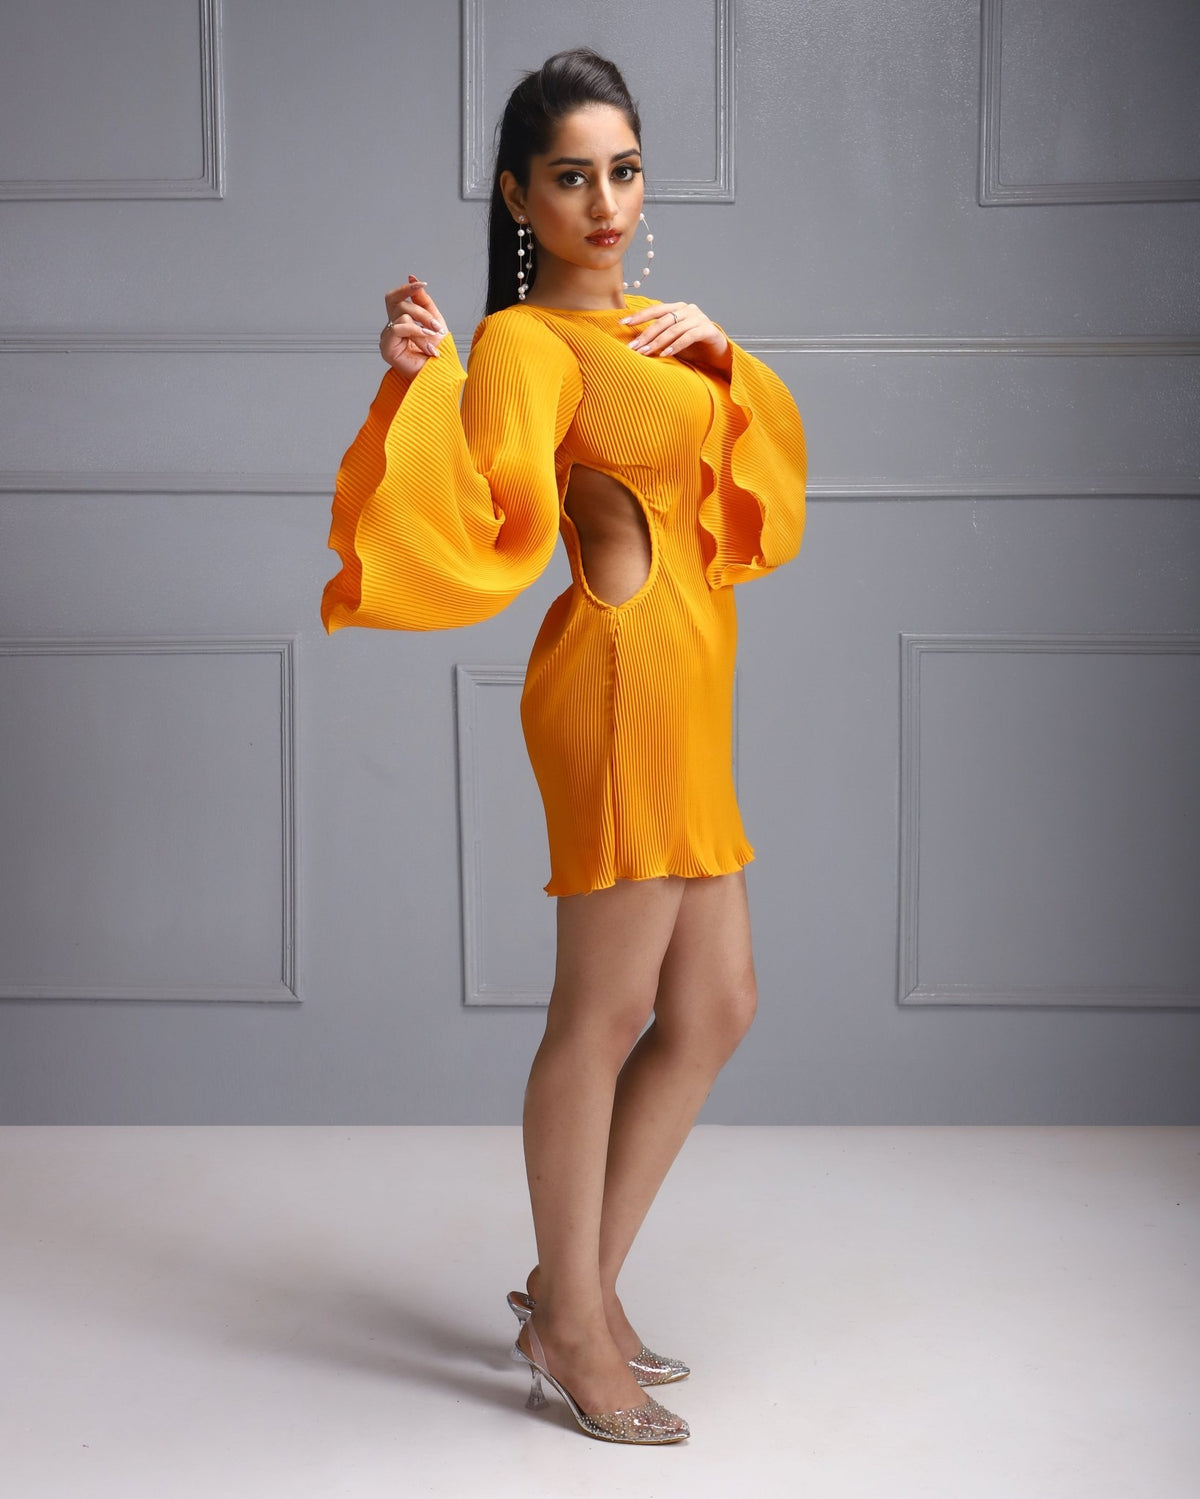 Bell Sleeve Dress, Orange Dress, Cut-out Dress, Fun Party Outfit, Bright Dress, Vibrant Fashion, Chic Look, Elegant Attire,